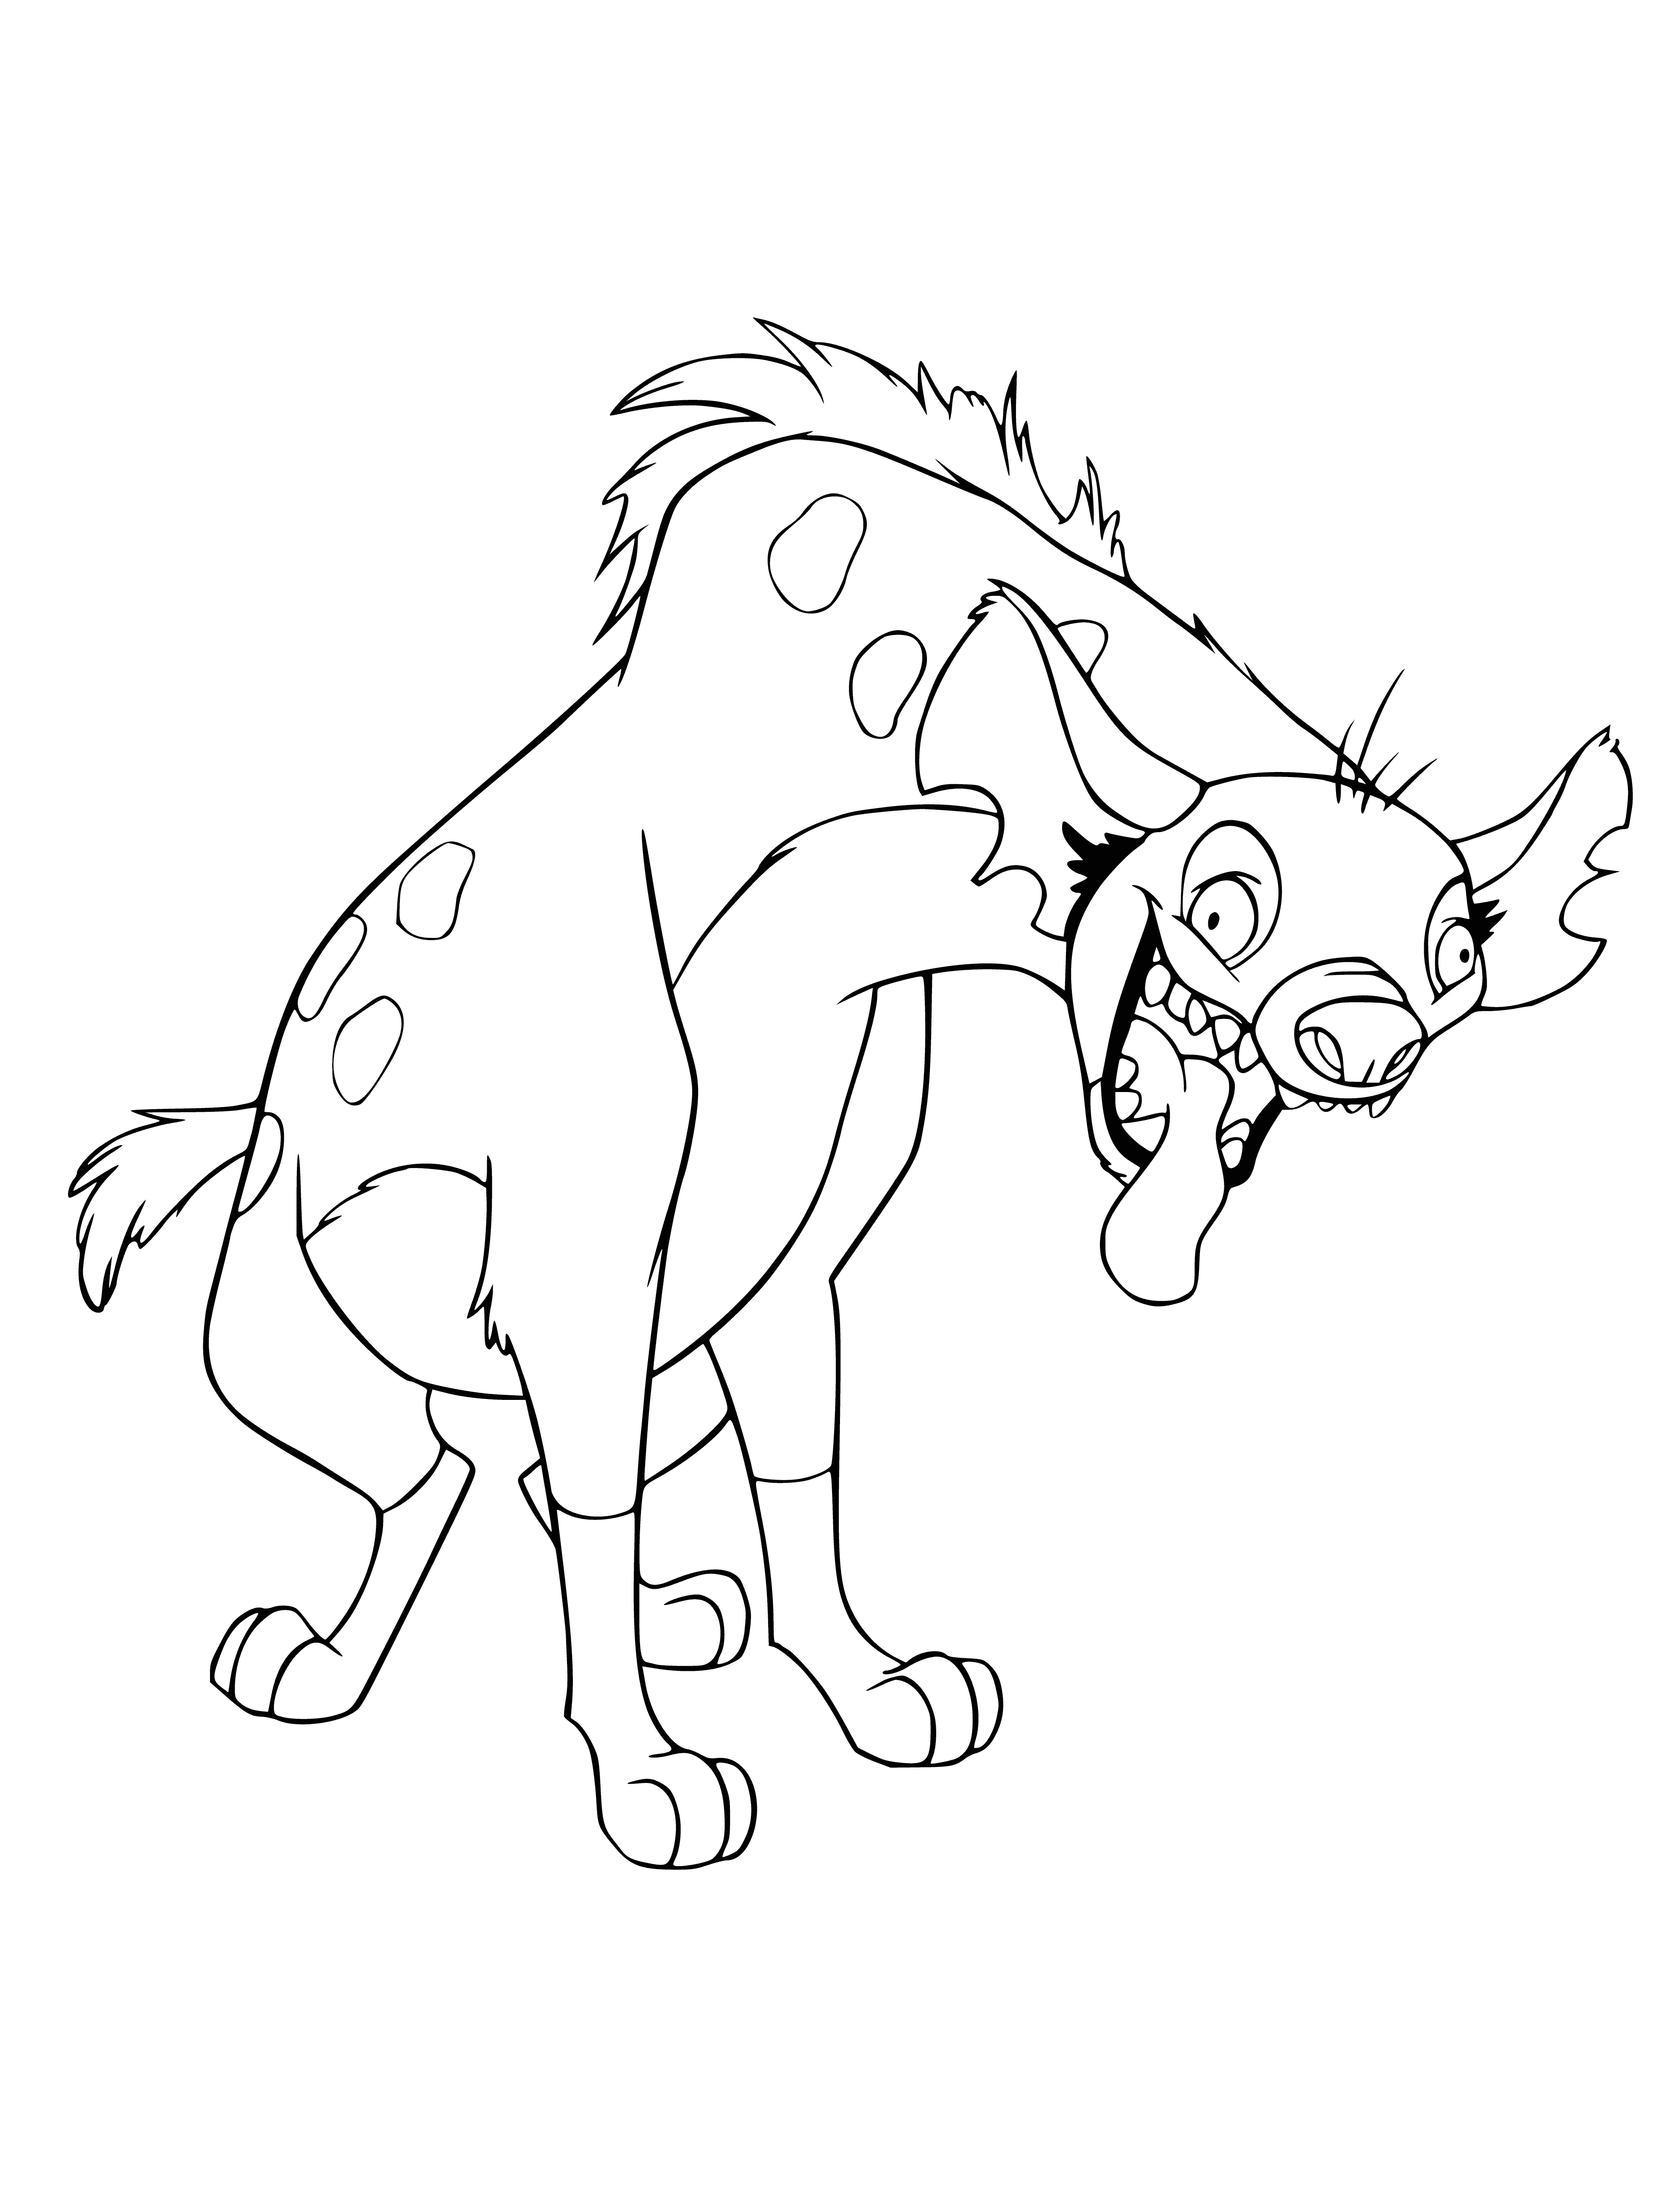 Hyena coloring page